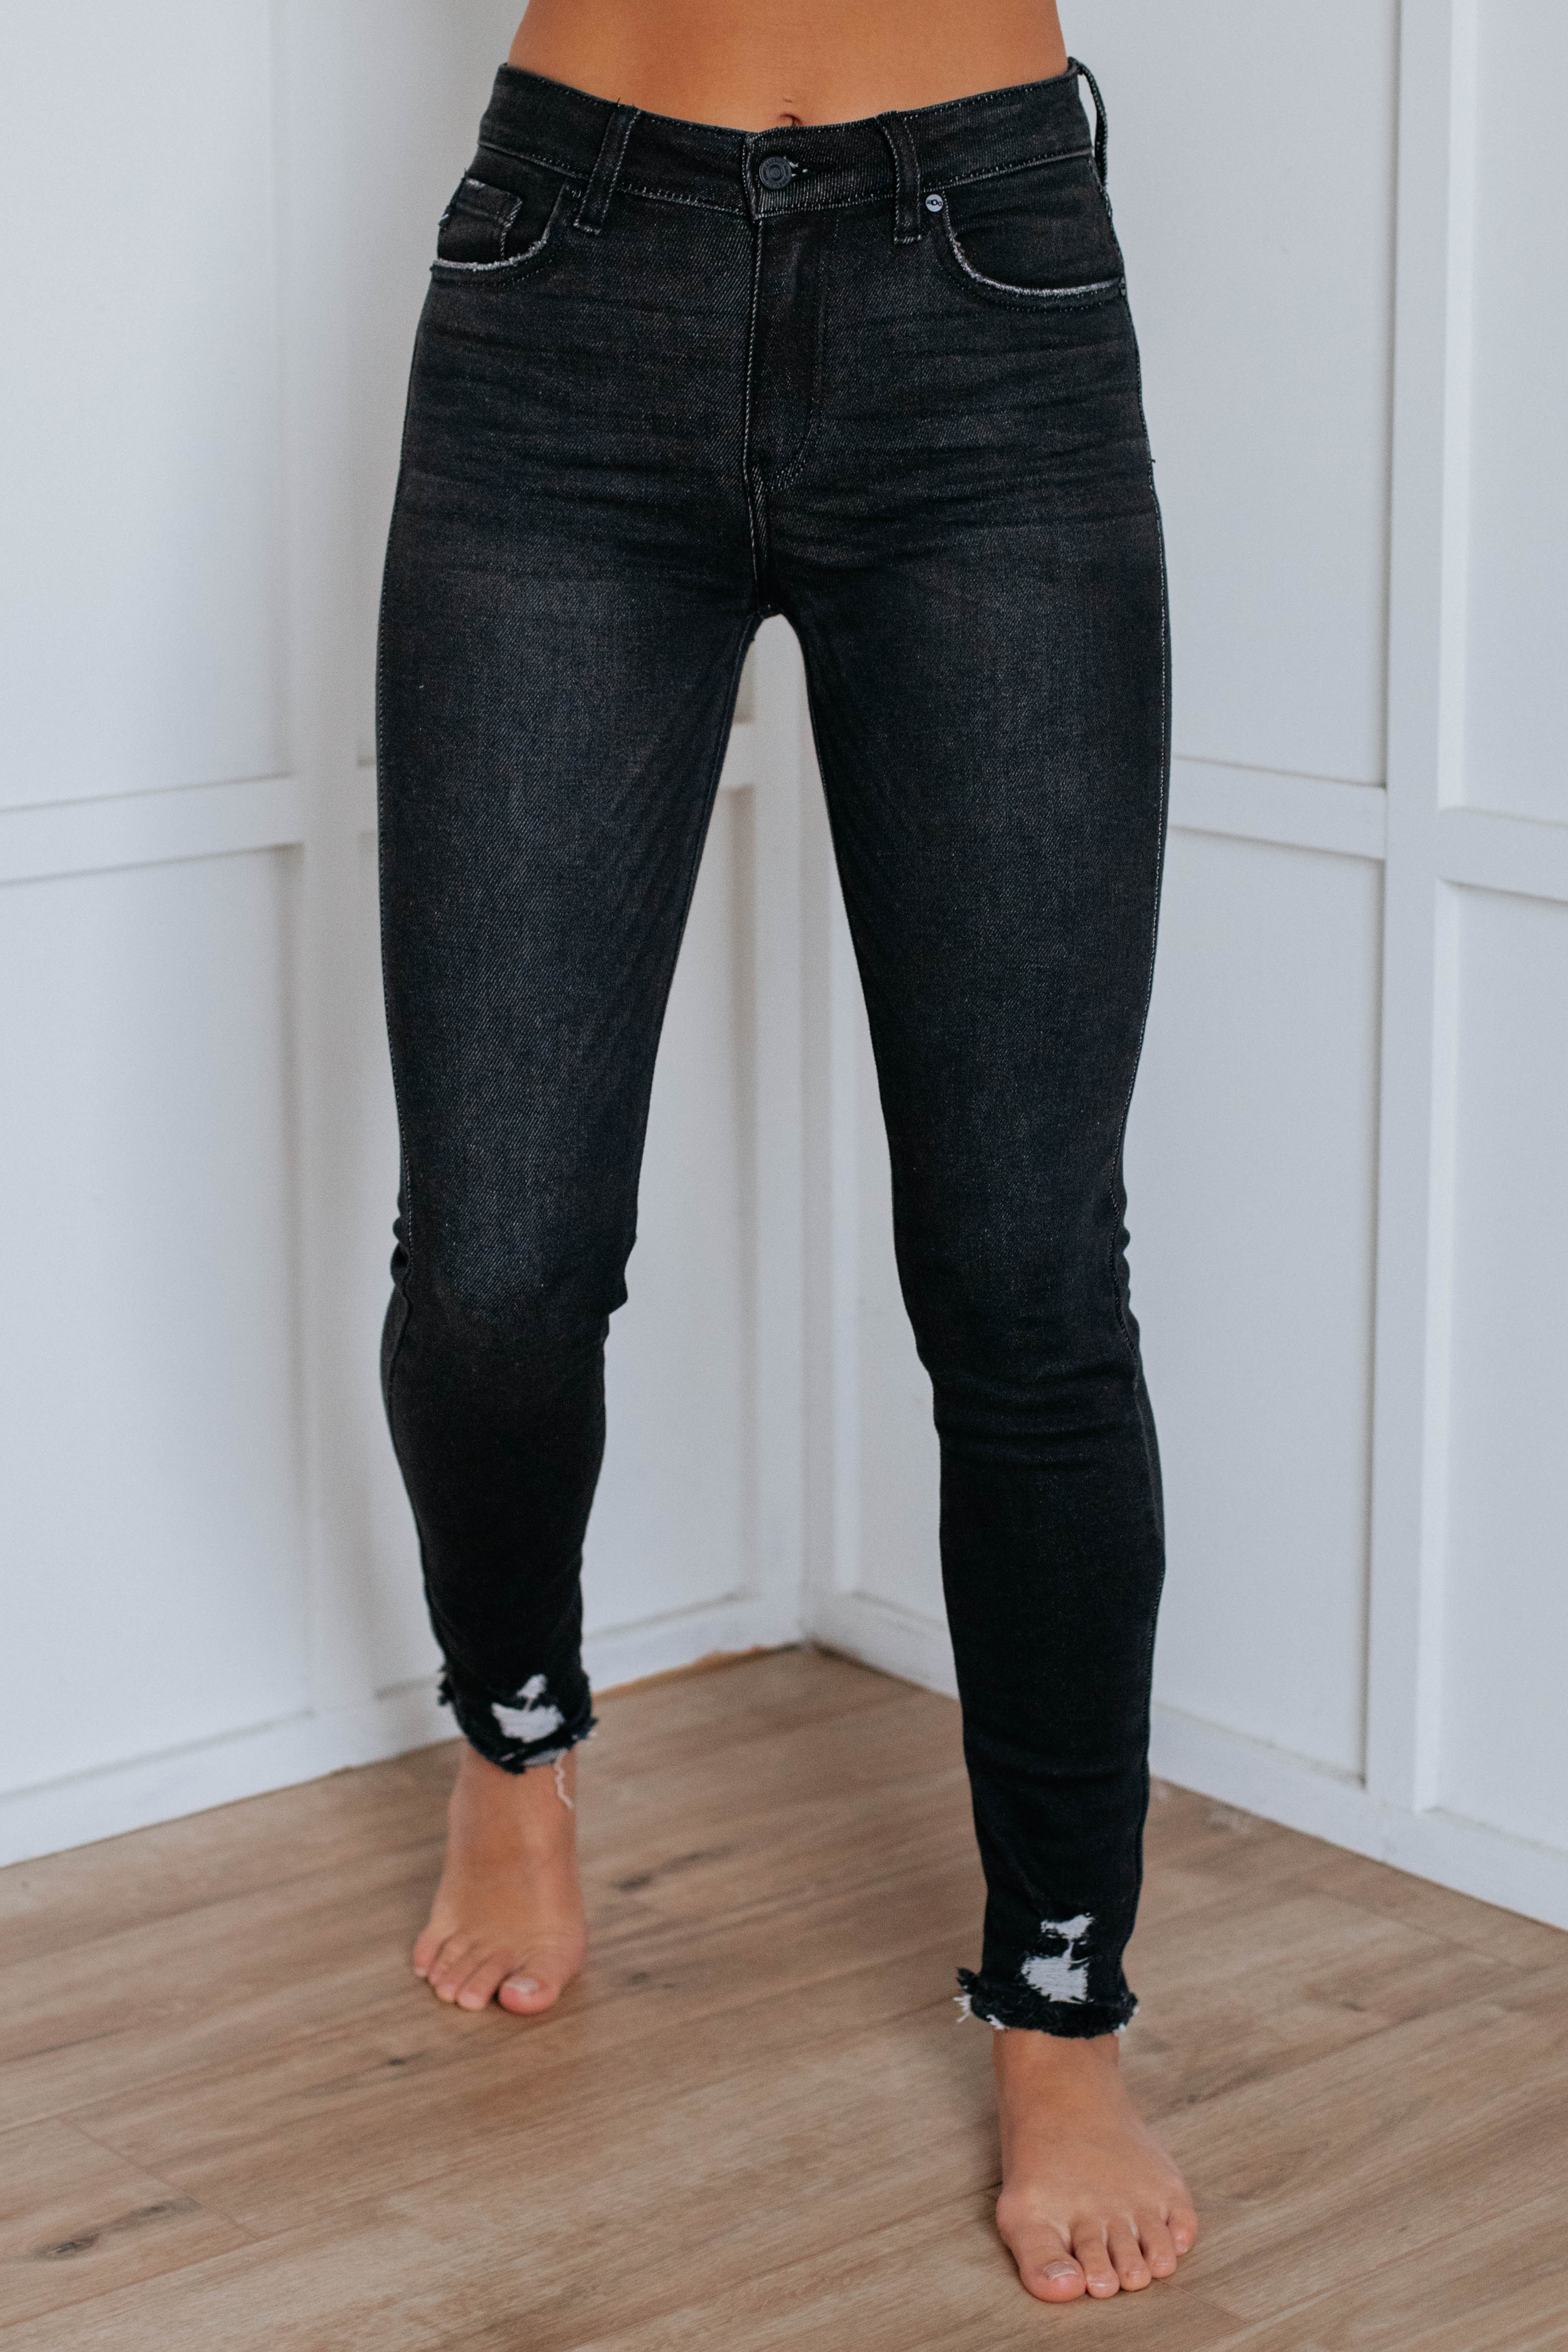 Image of Ariana KanCan Jeans